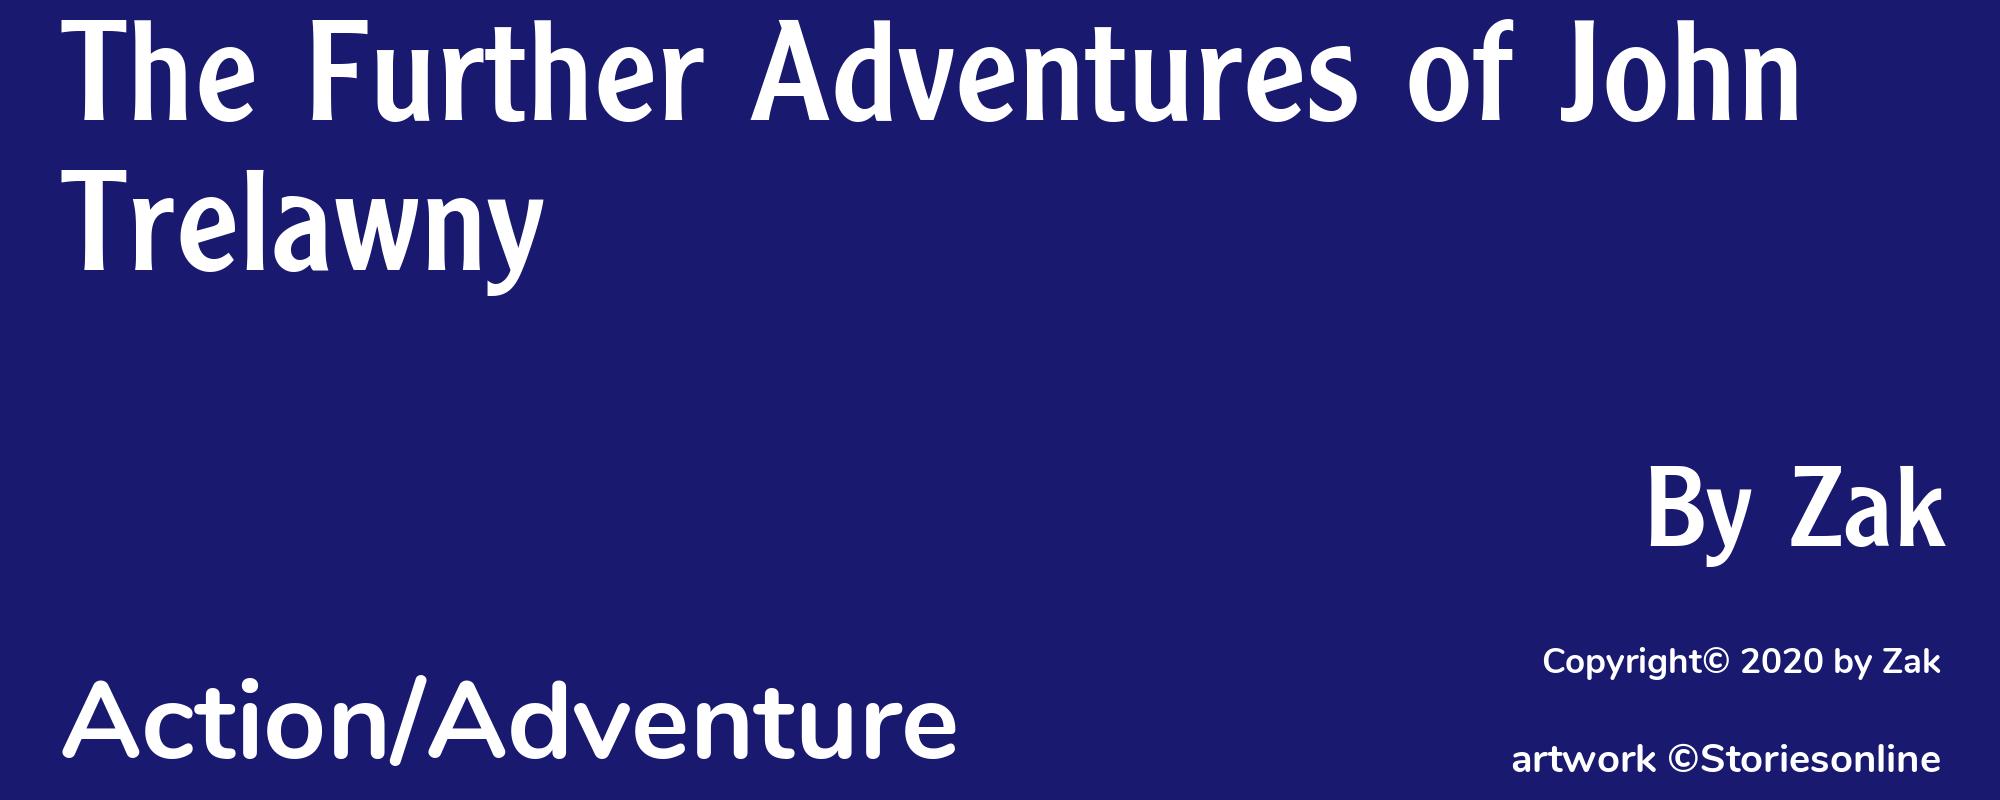 The Further Adventures of John Trelawny - Cover